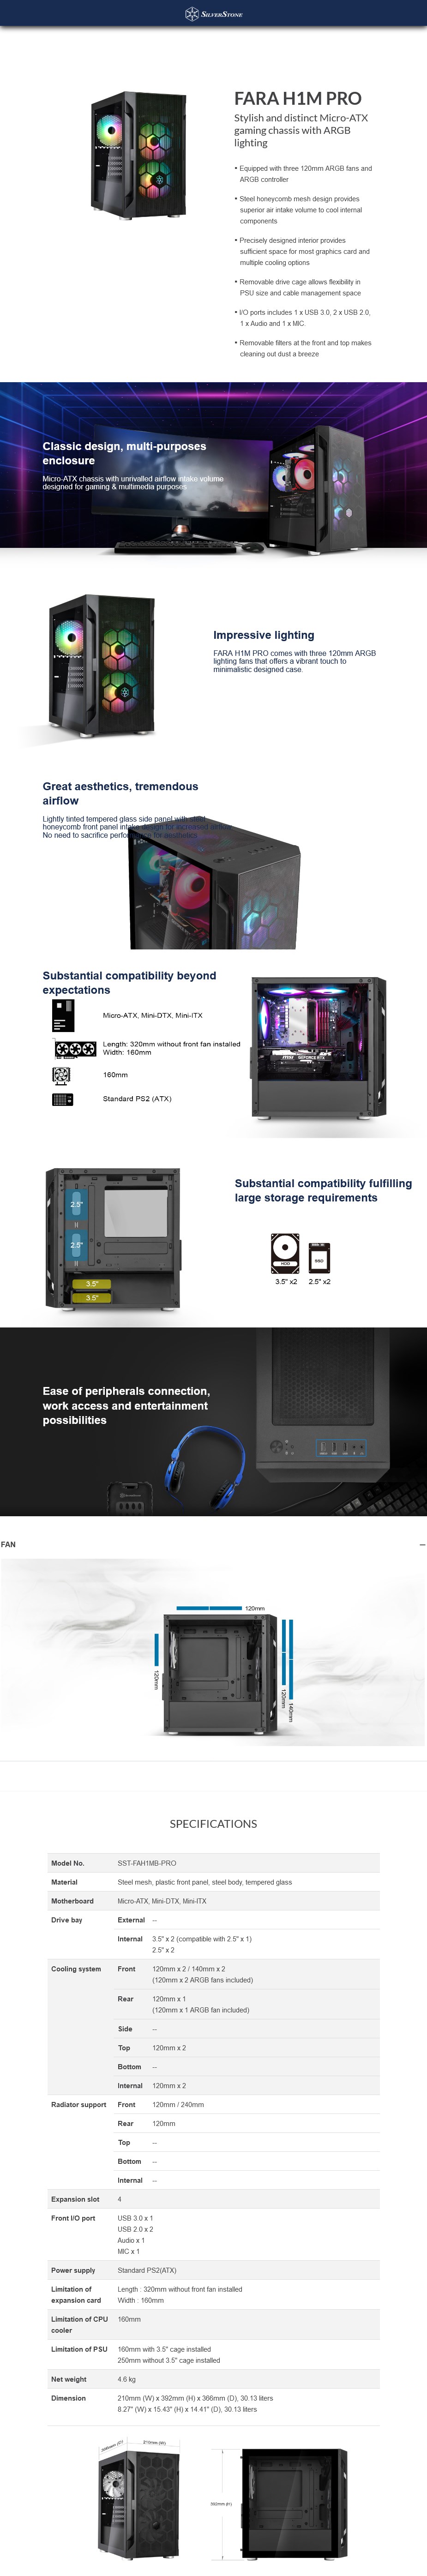 A large marketing image providing additional information about the product SilverStone FARA H1M Pro Micro Tower Case - Black - Additional alt info not provided